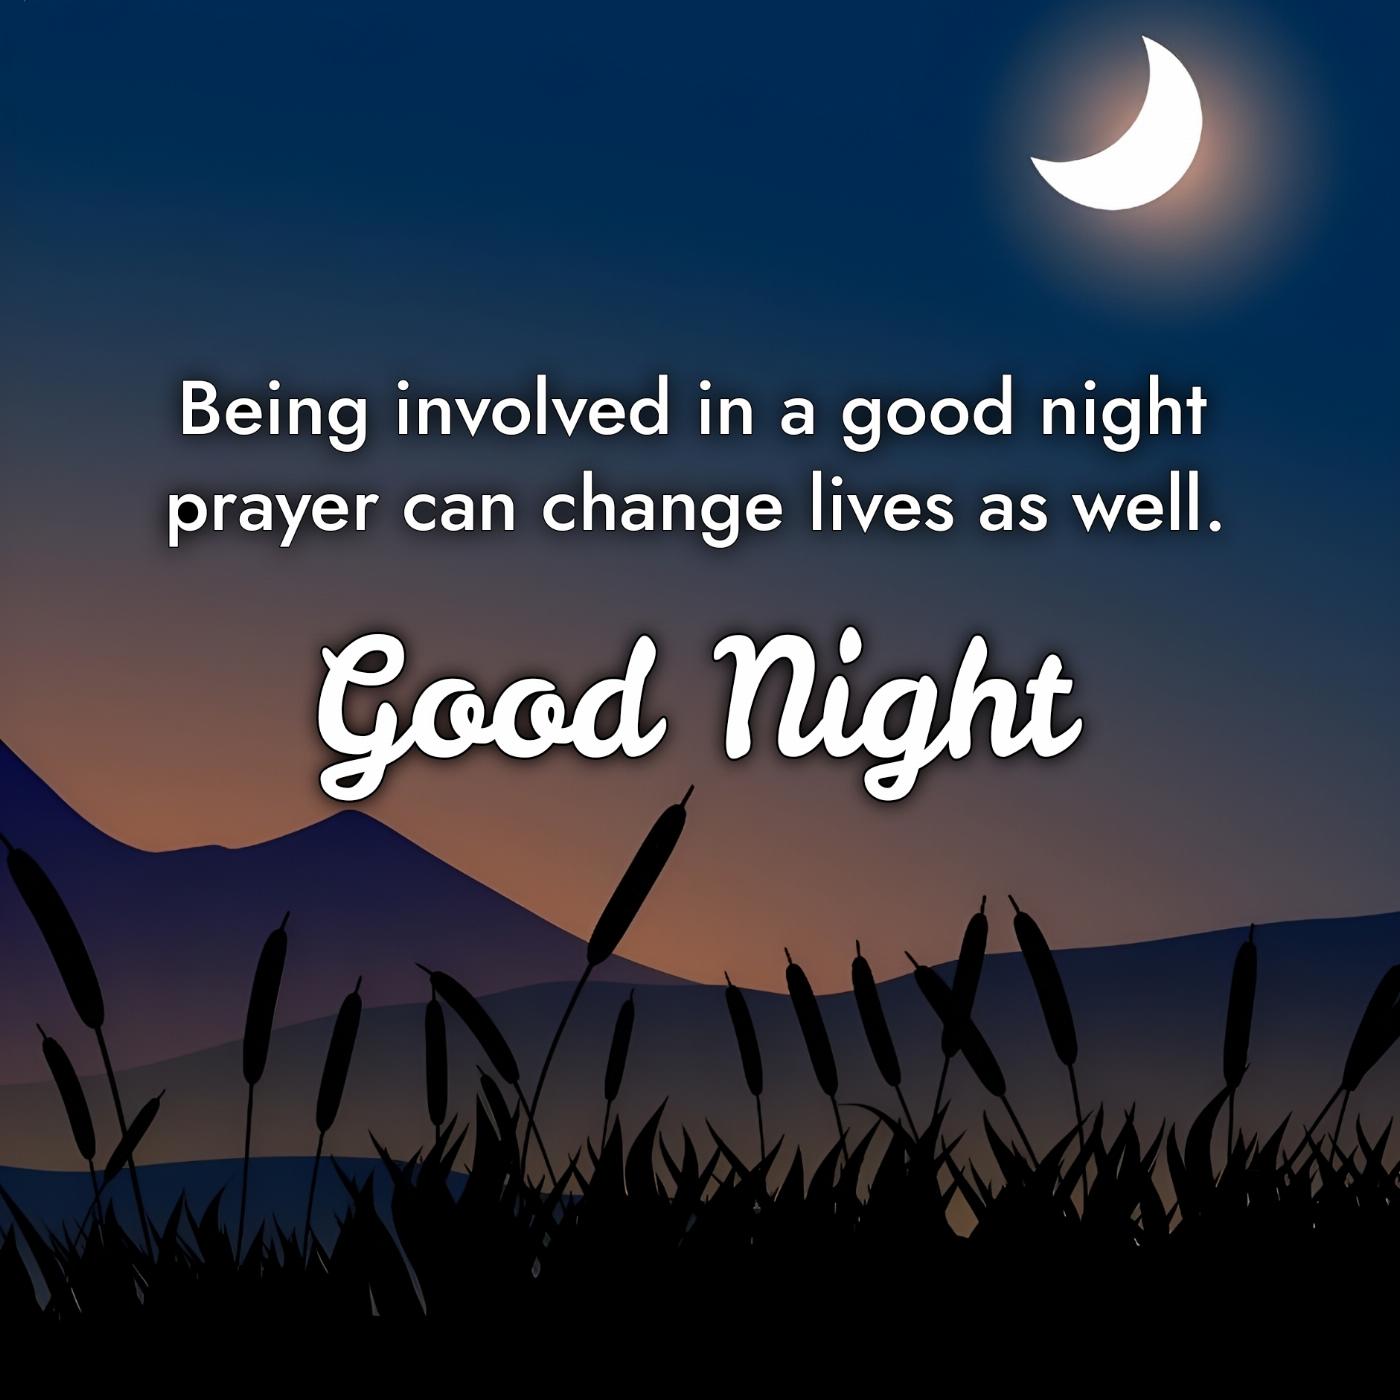 Being involved in a good night prayer can change lives